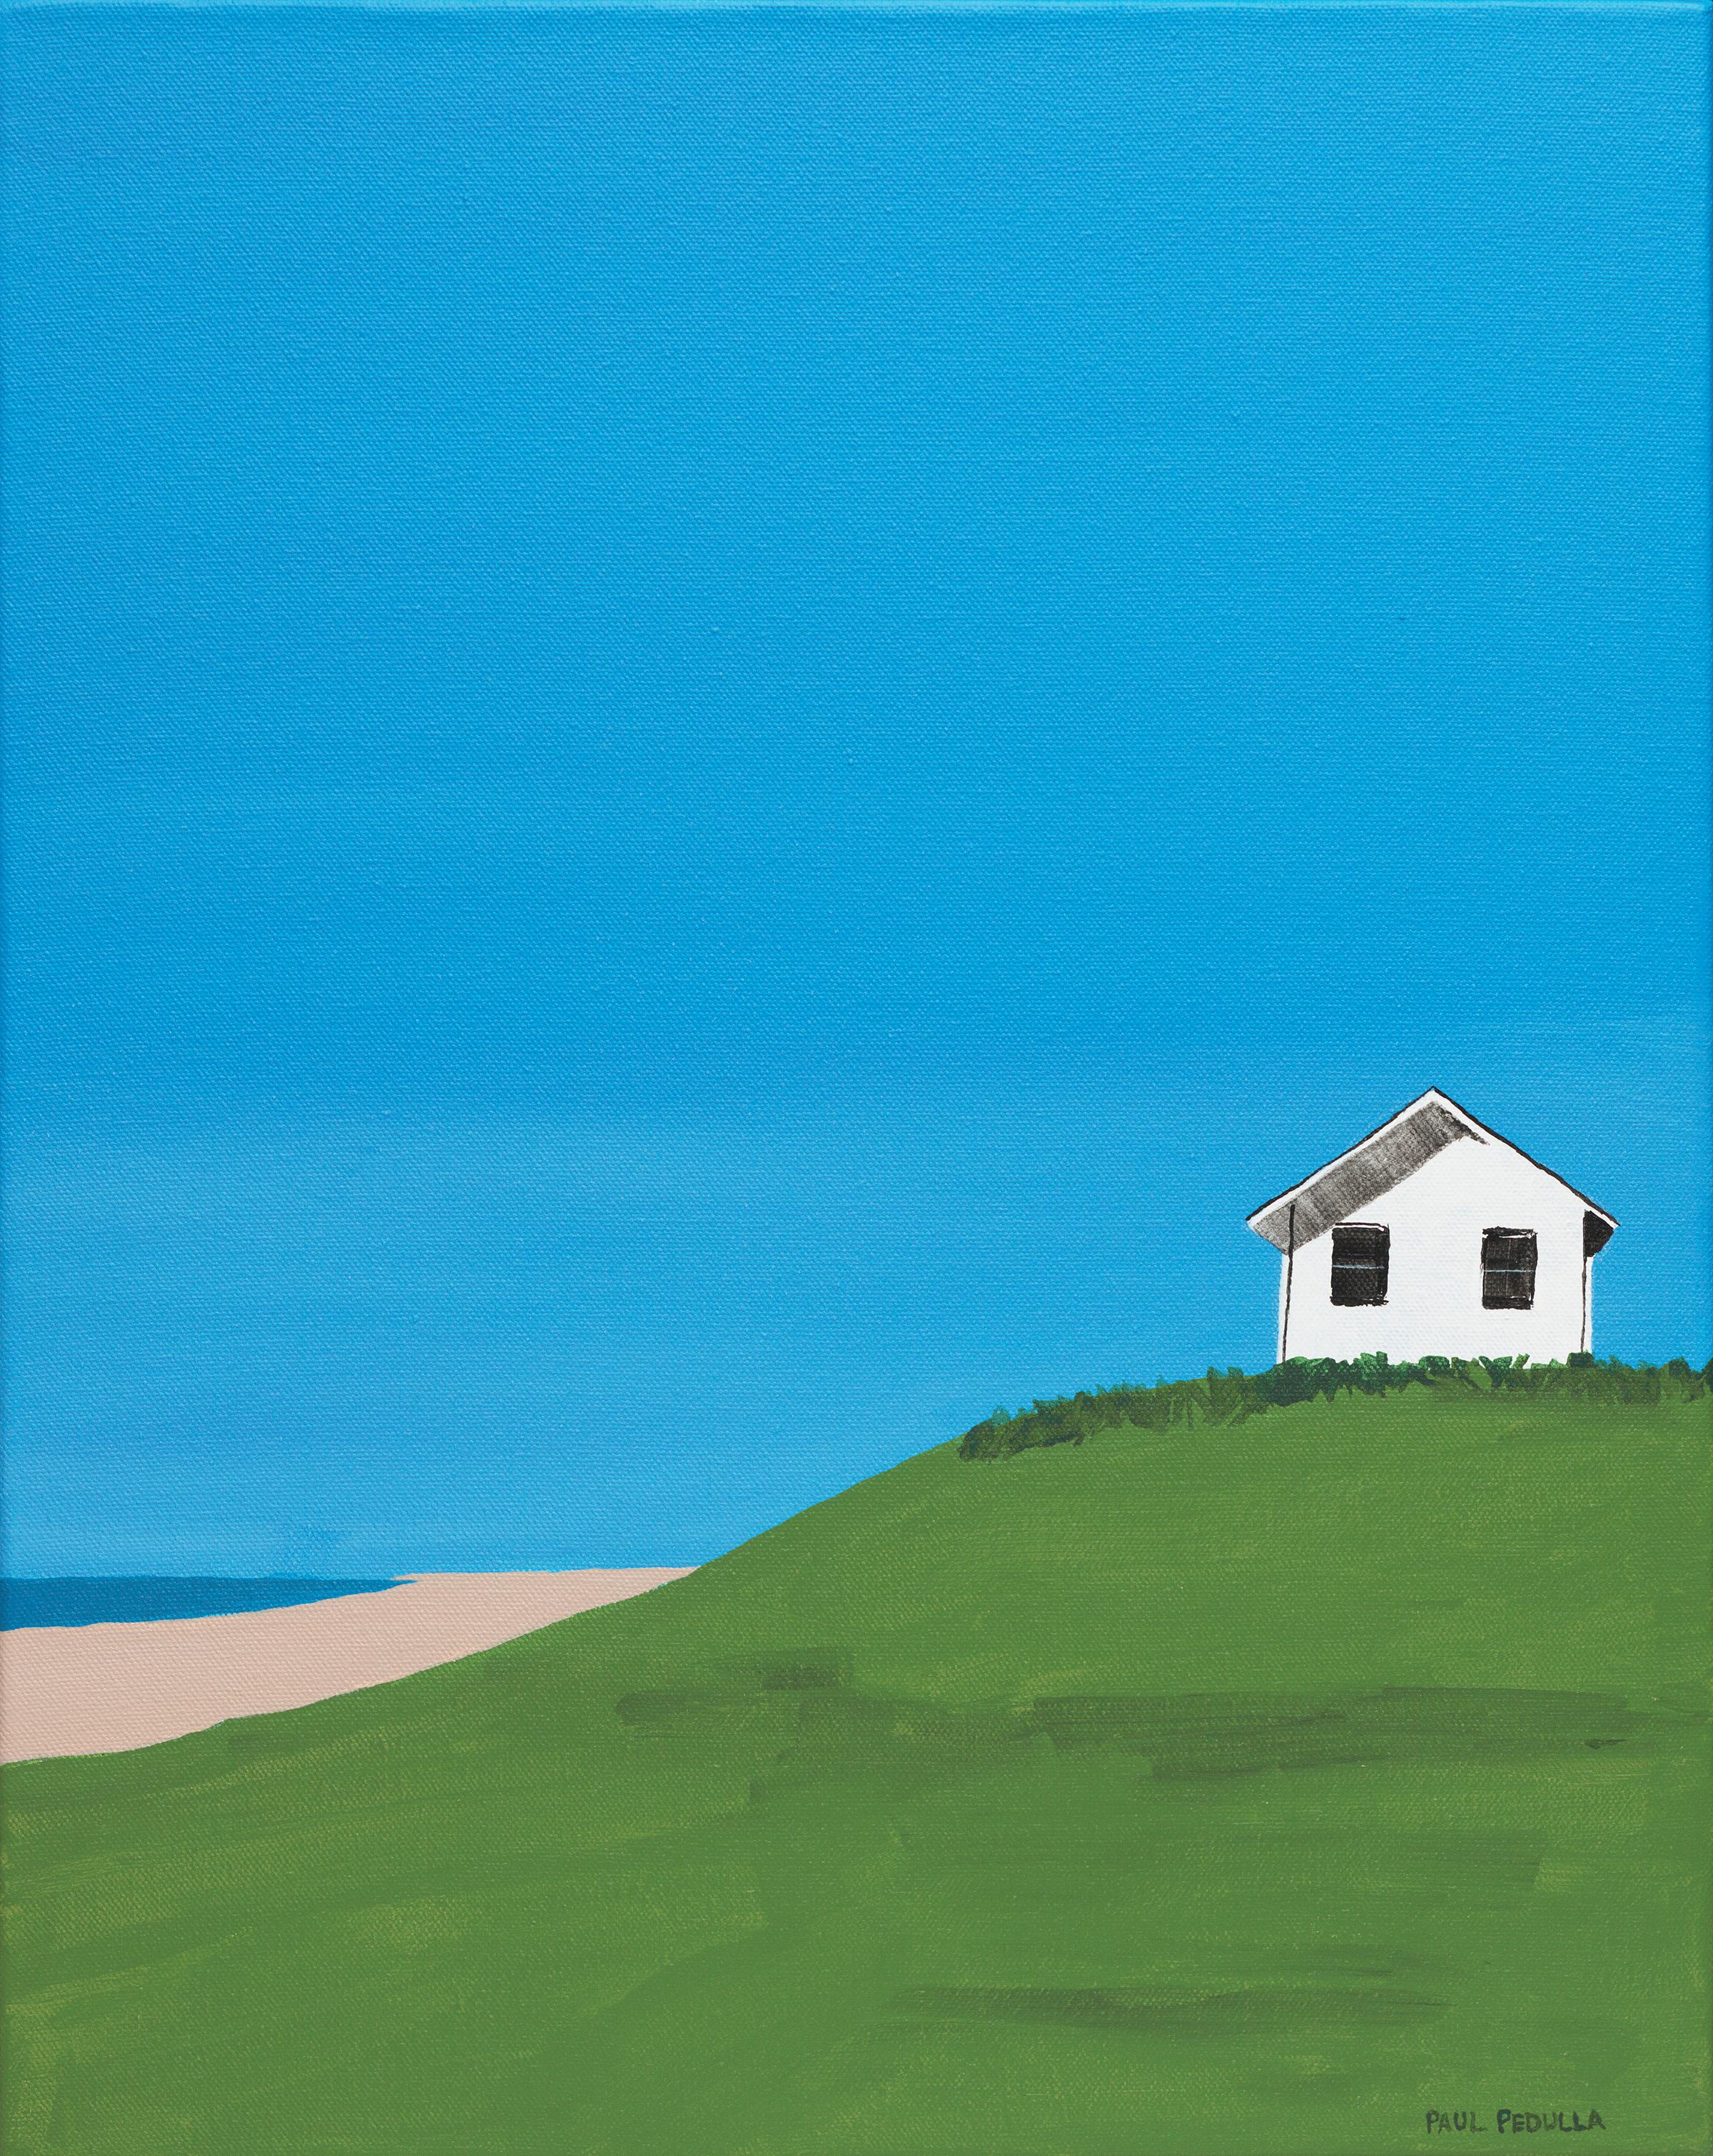 Paul Pedulla Landscape Print – The Cottage on the Hill